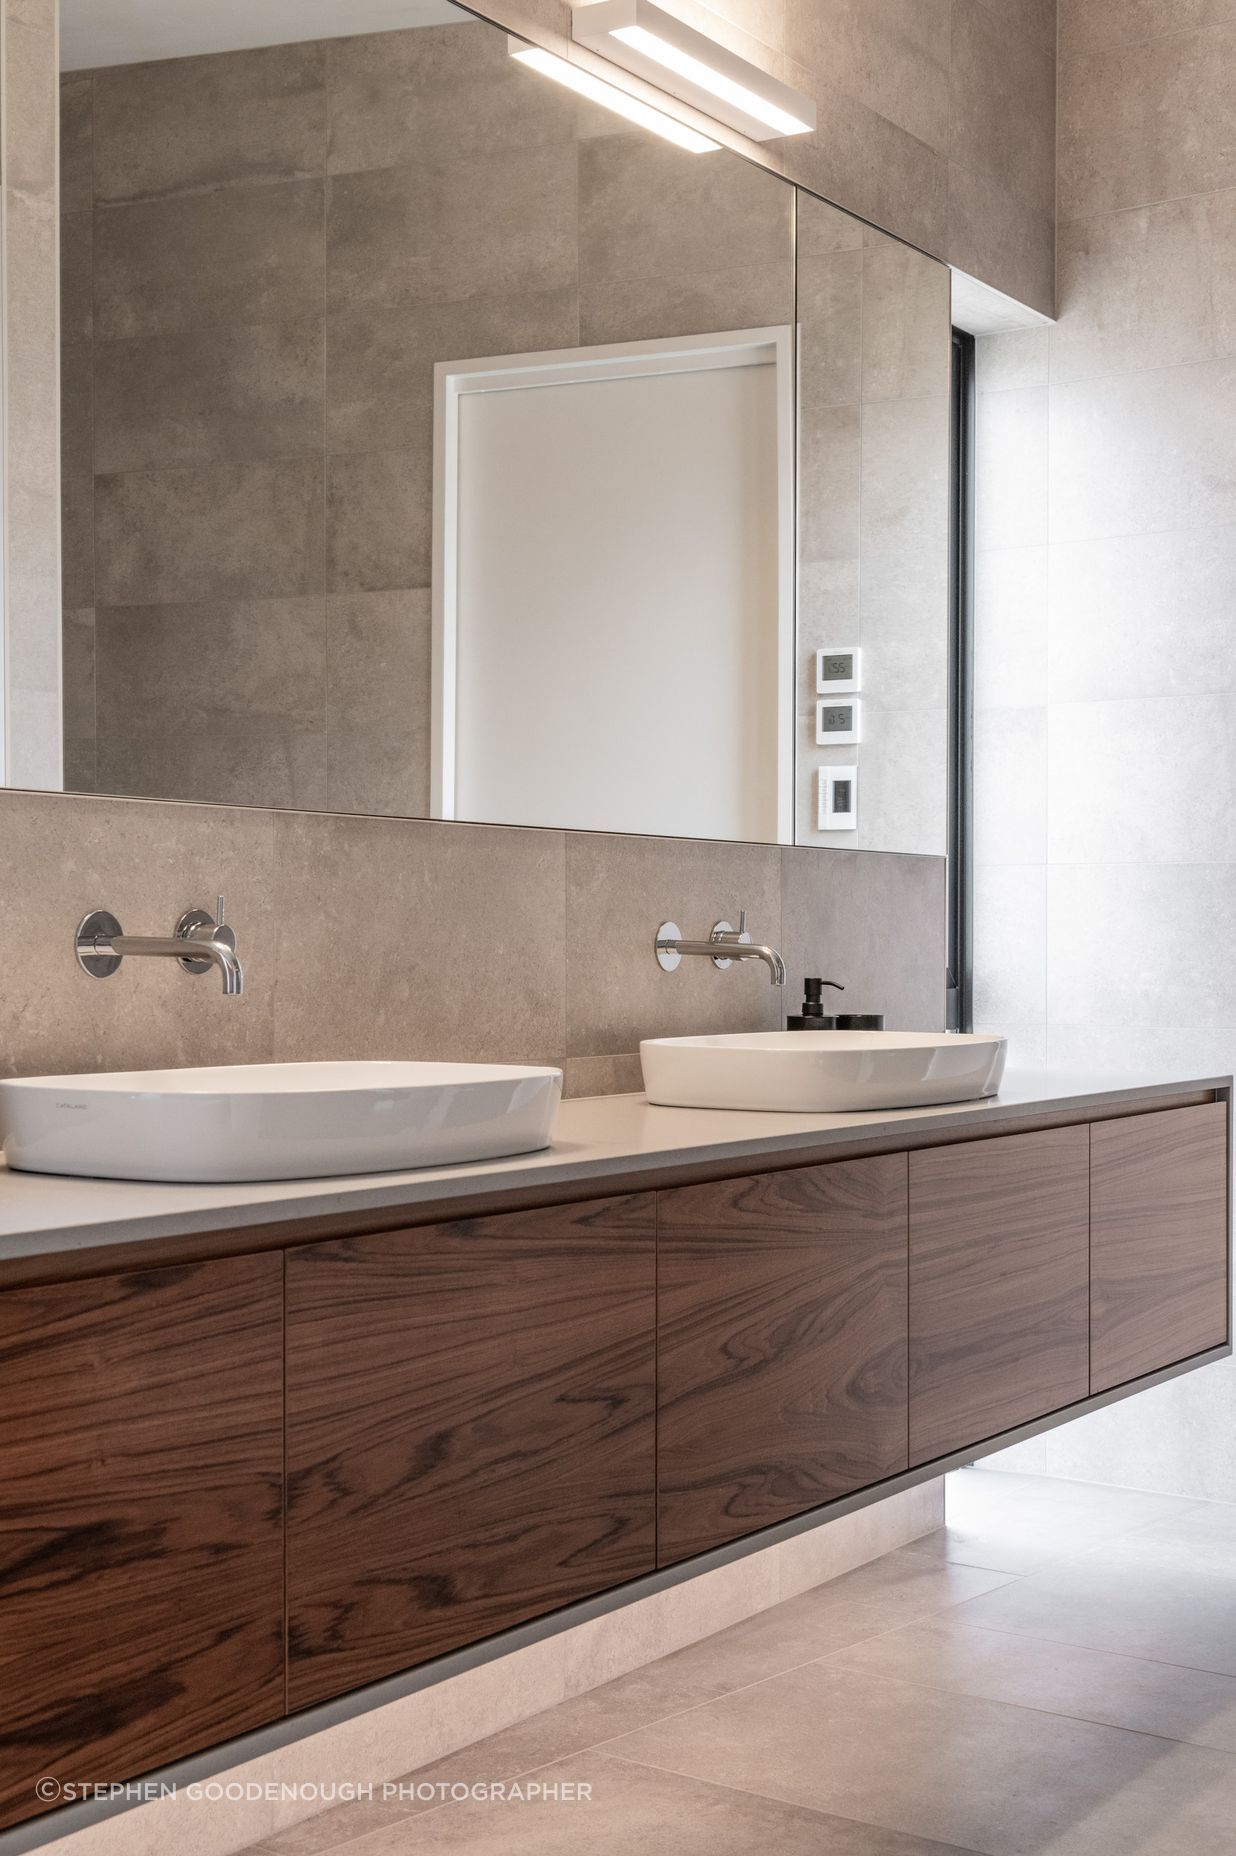 In the bathrooms a teak veneer was used to warm the otherwise serene spaces.